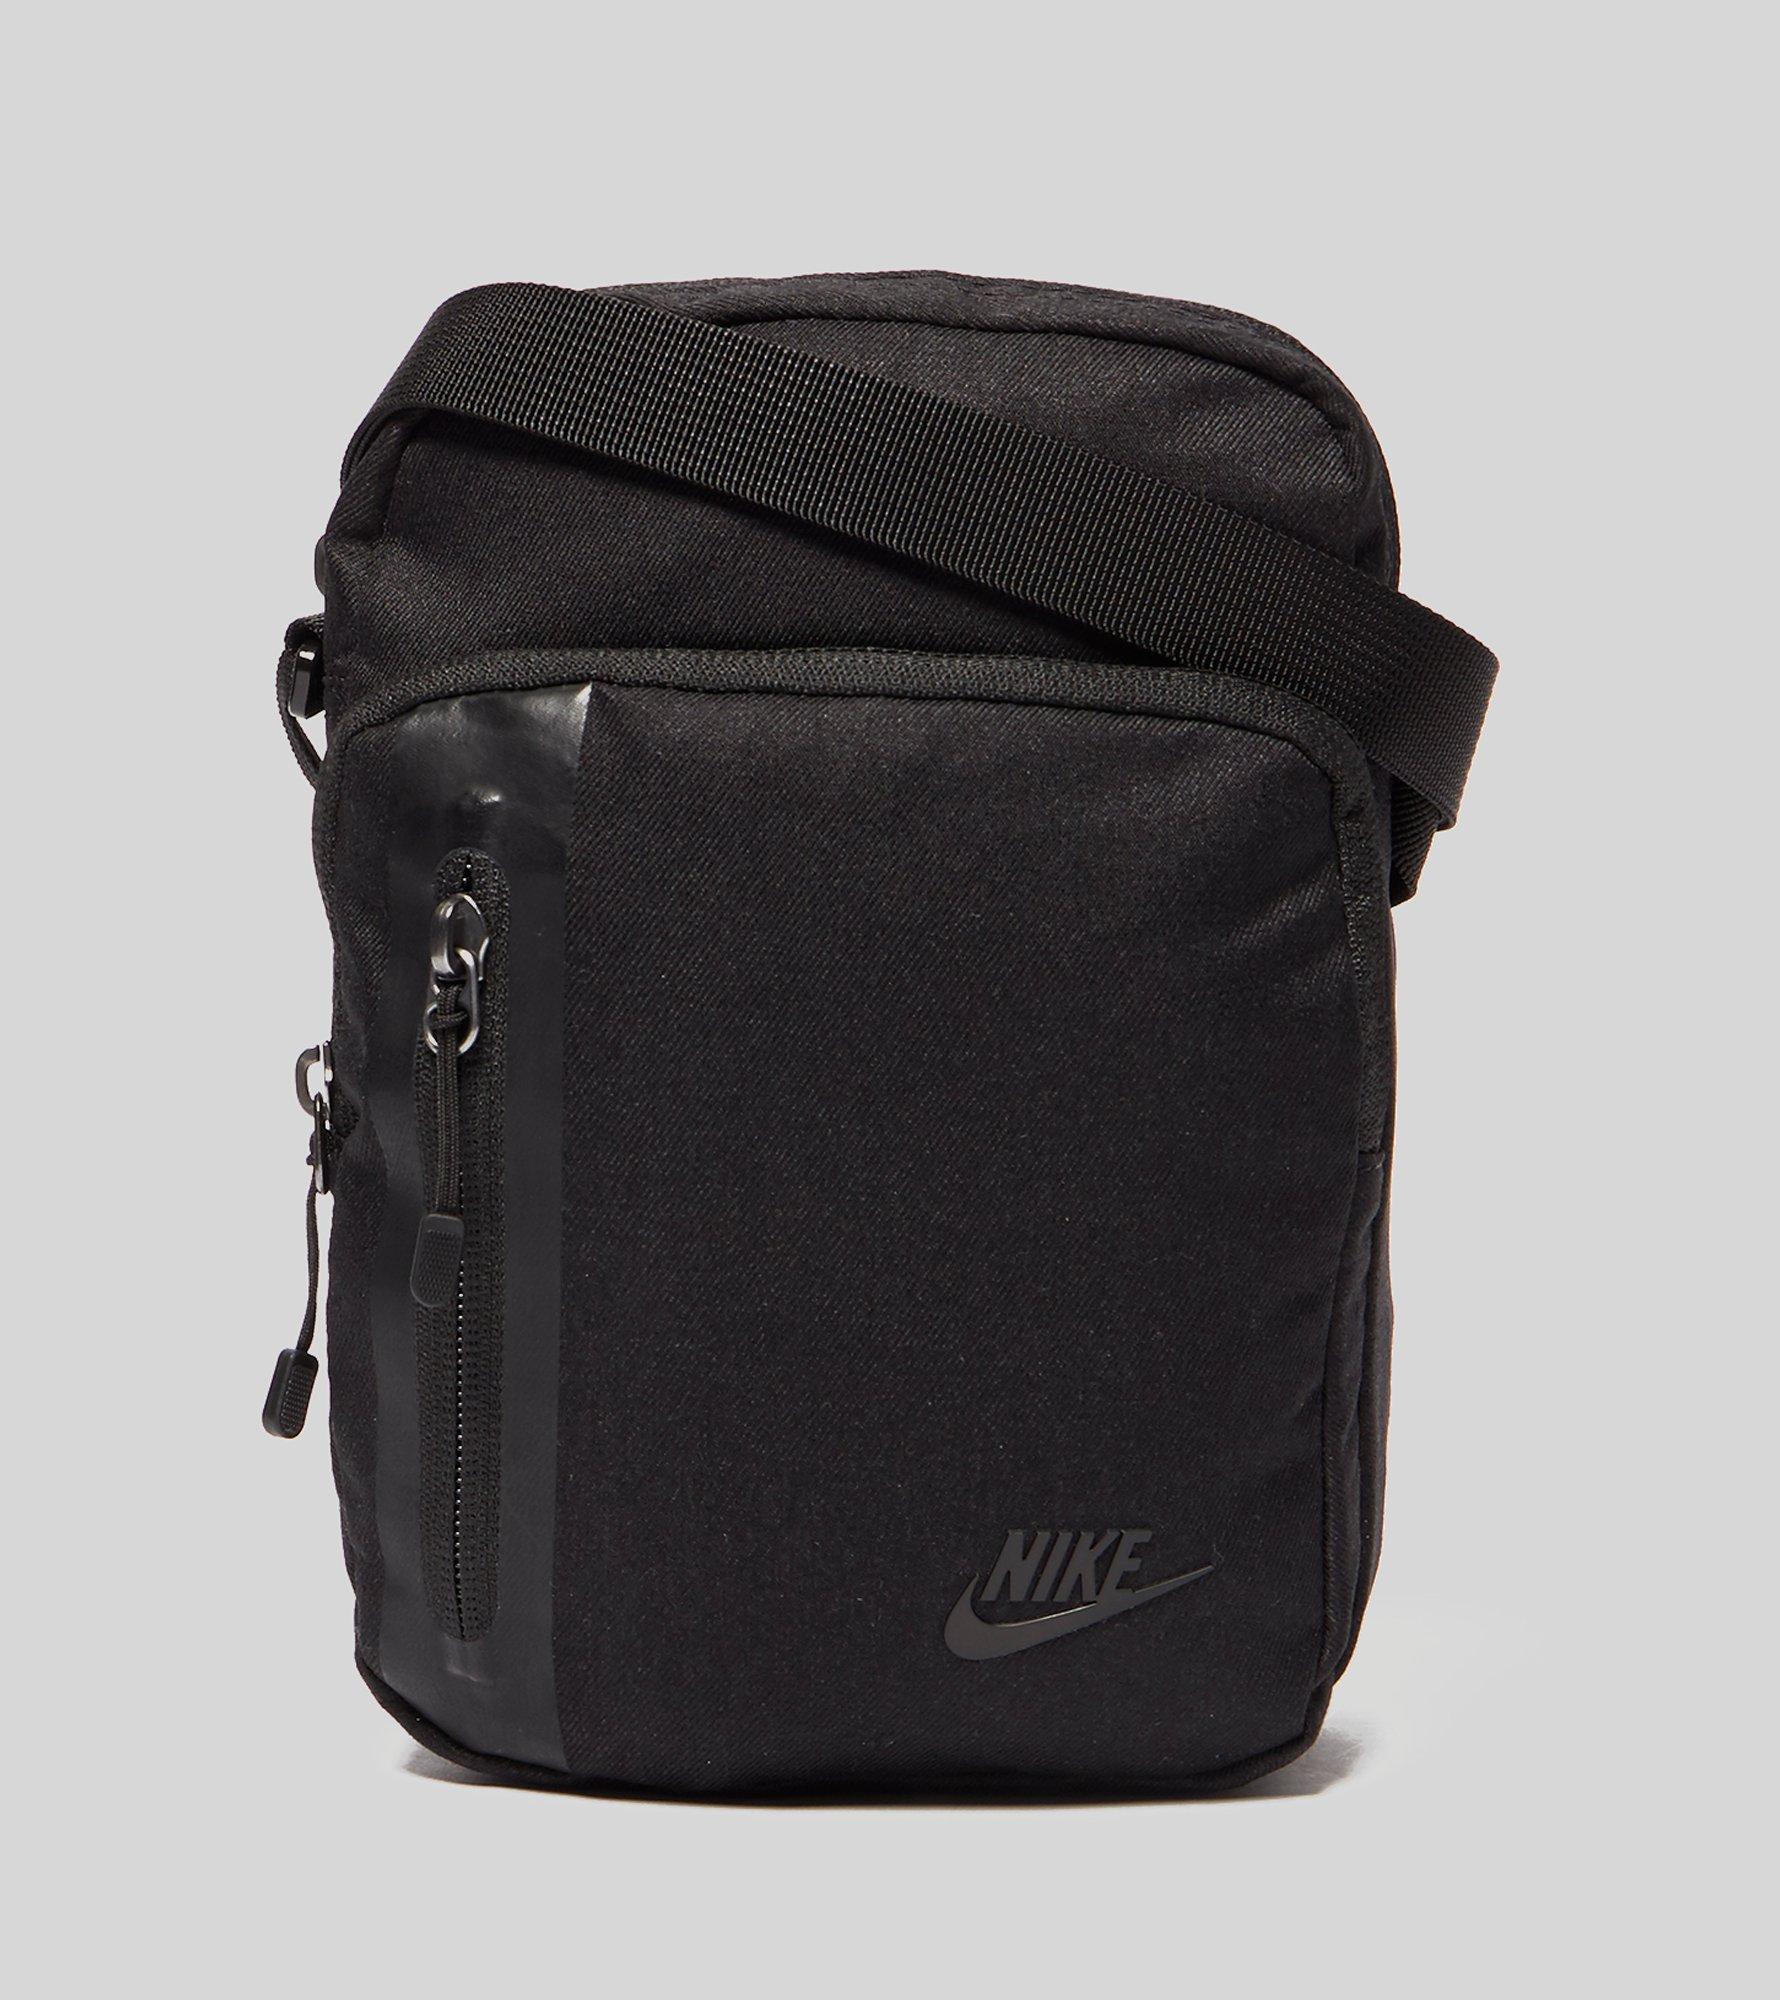 Nike Synthetic Core Small Crossbody Bag in Black for Men - Lyst